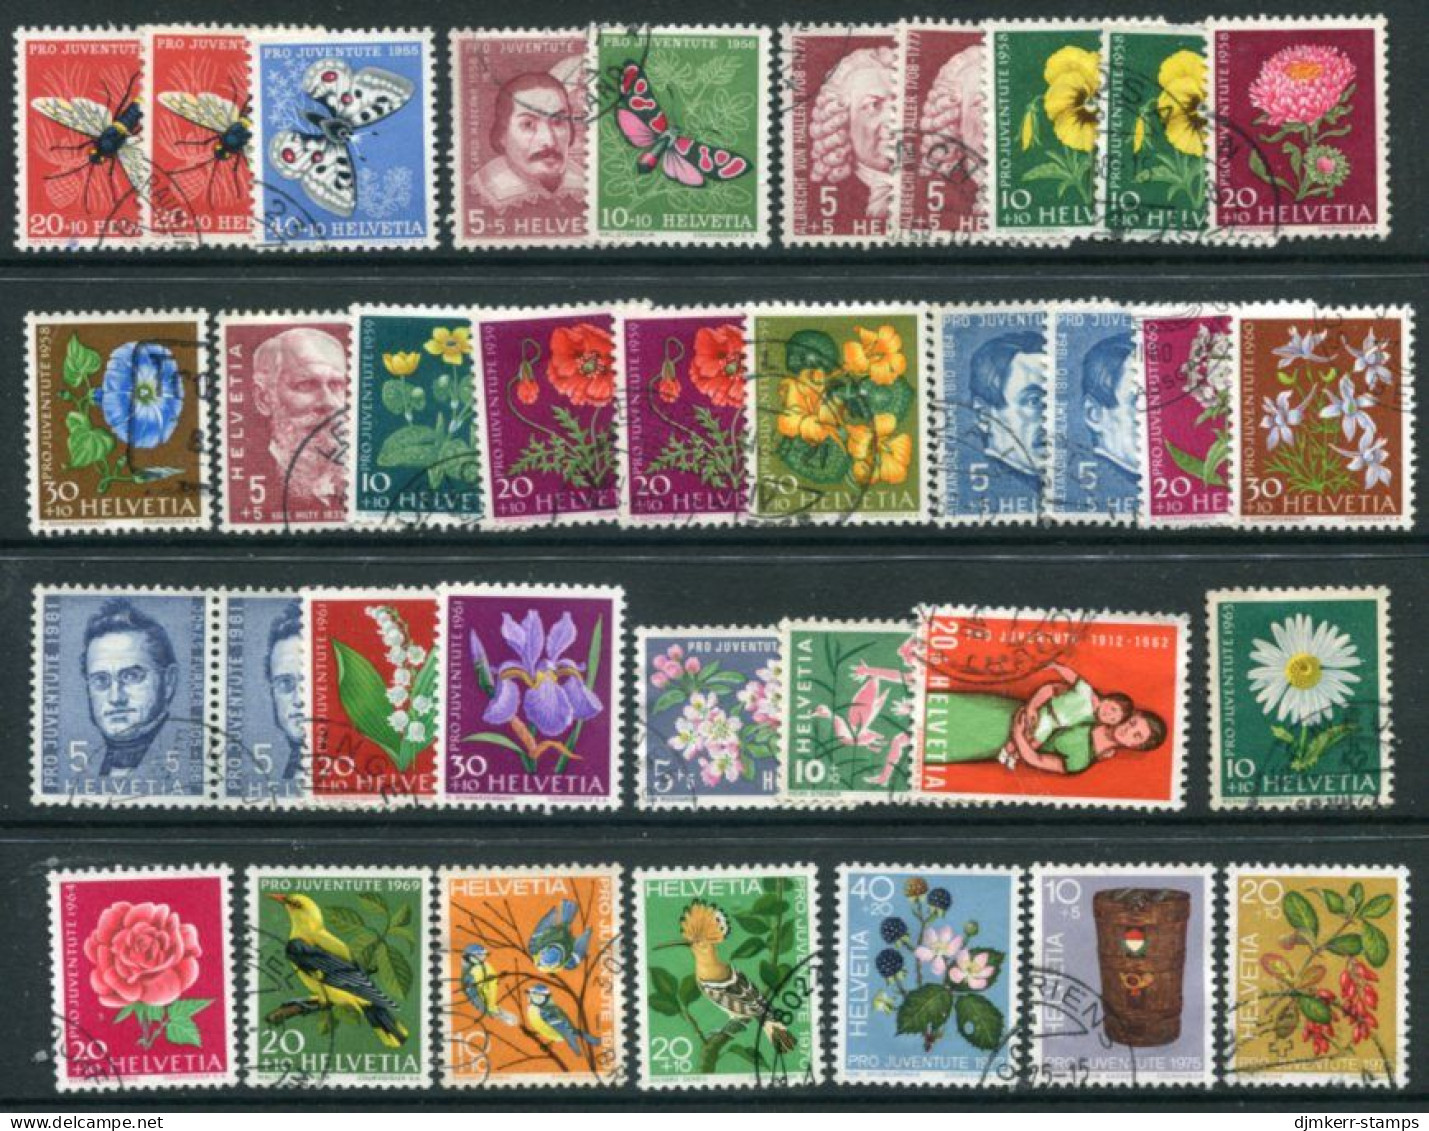 SWITZERLAND 1920-75 Pro Juventute Range Of 103 Used Stamps. - Used Stamps